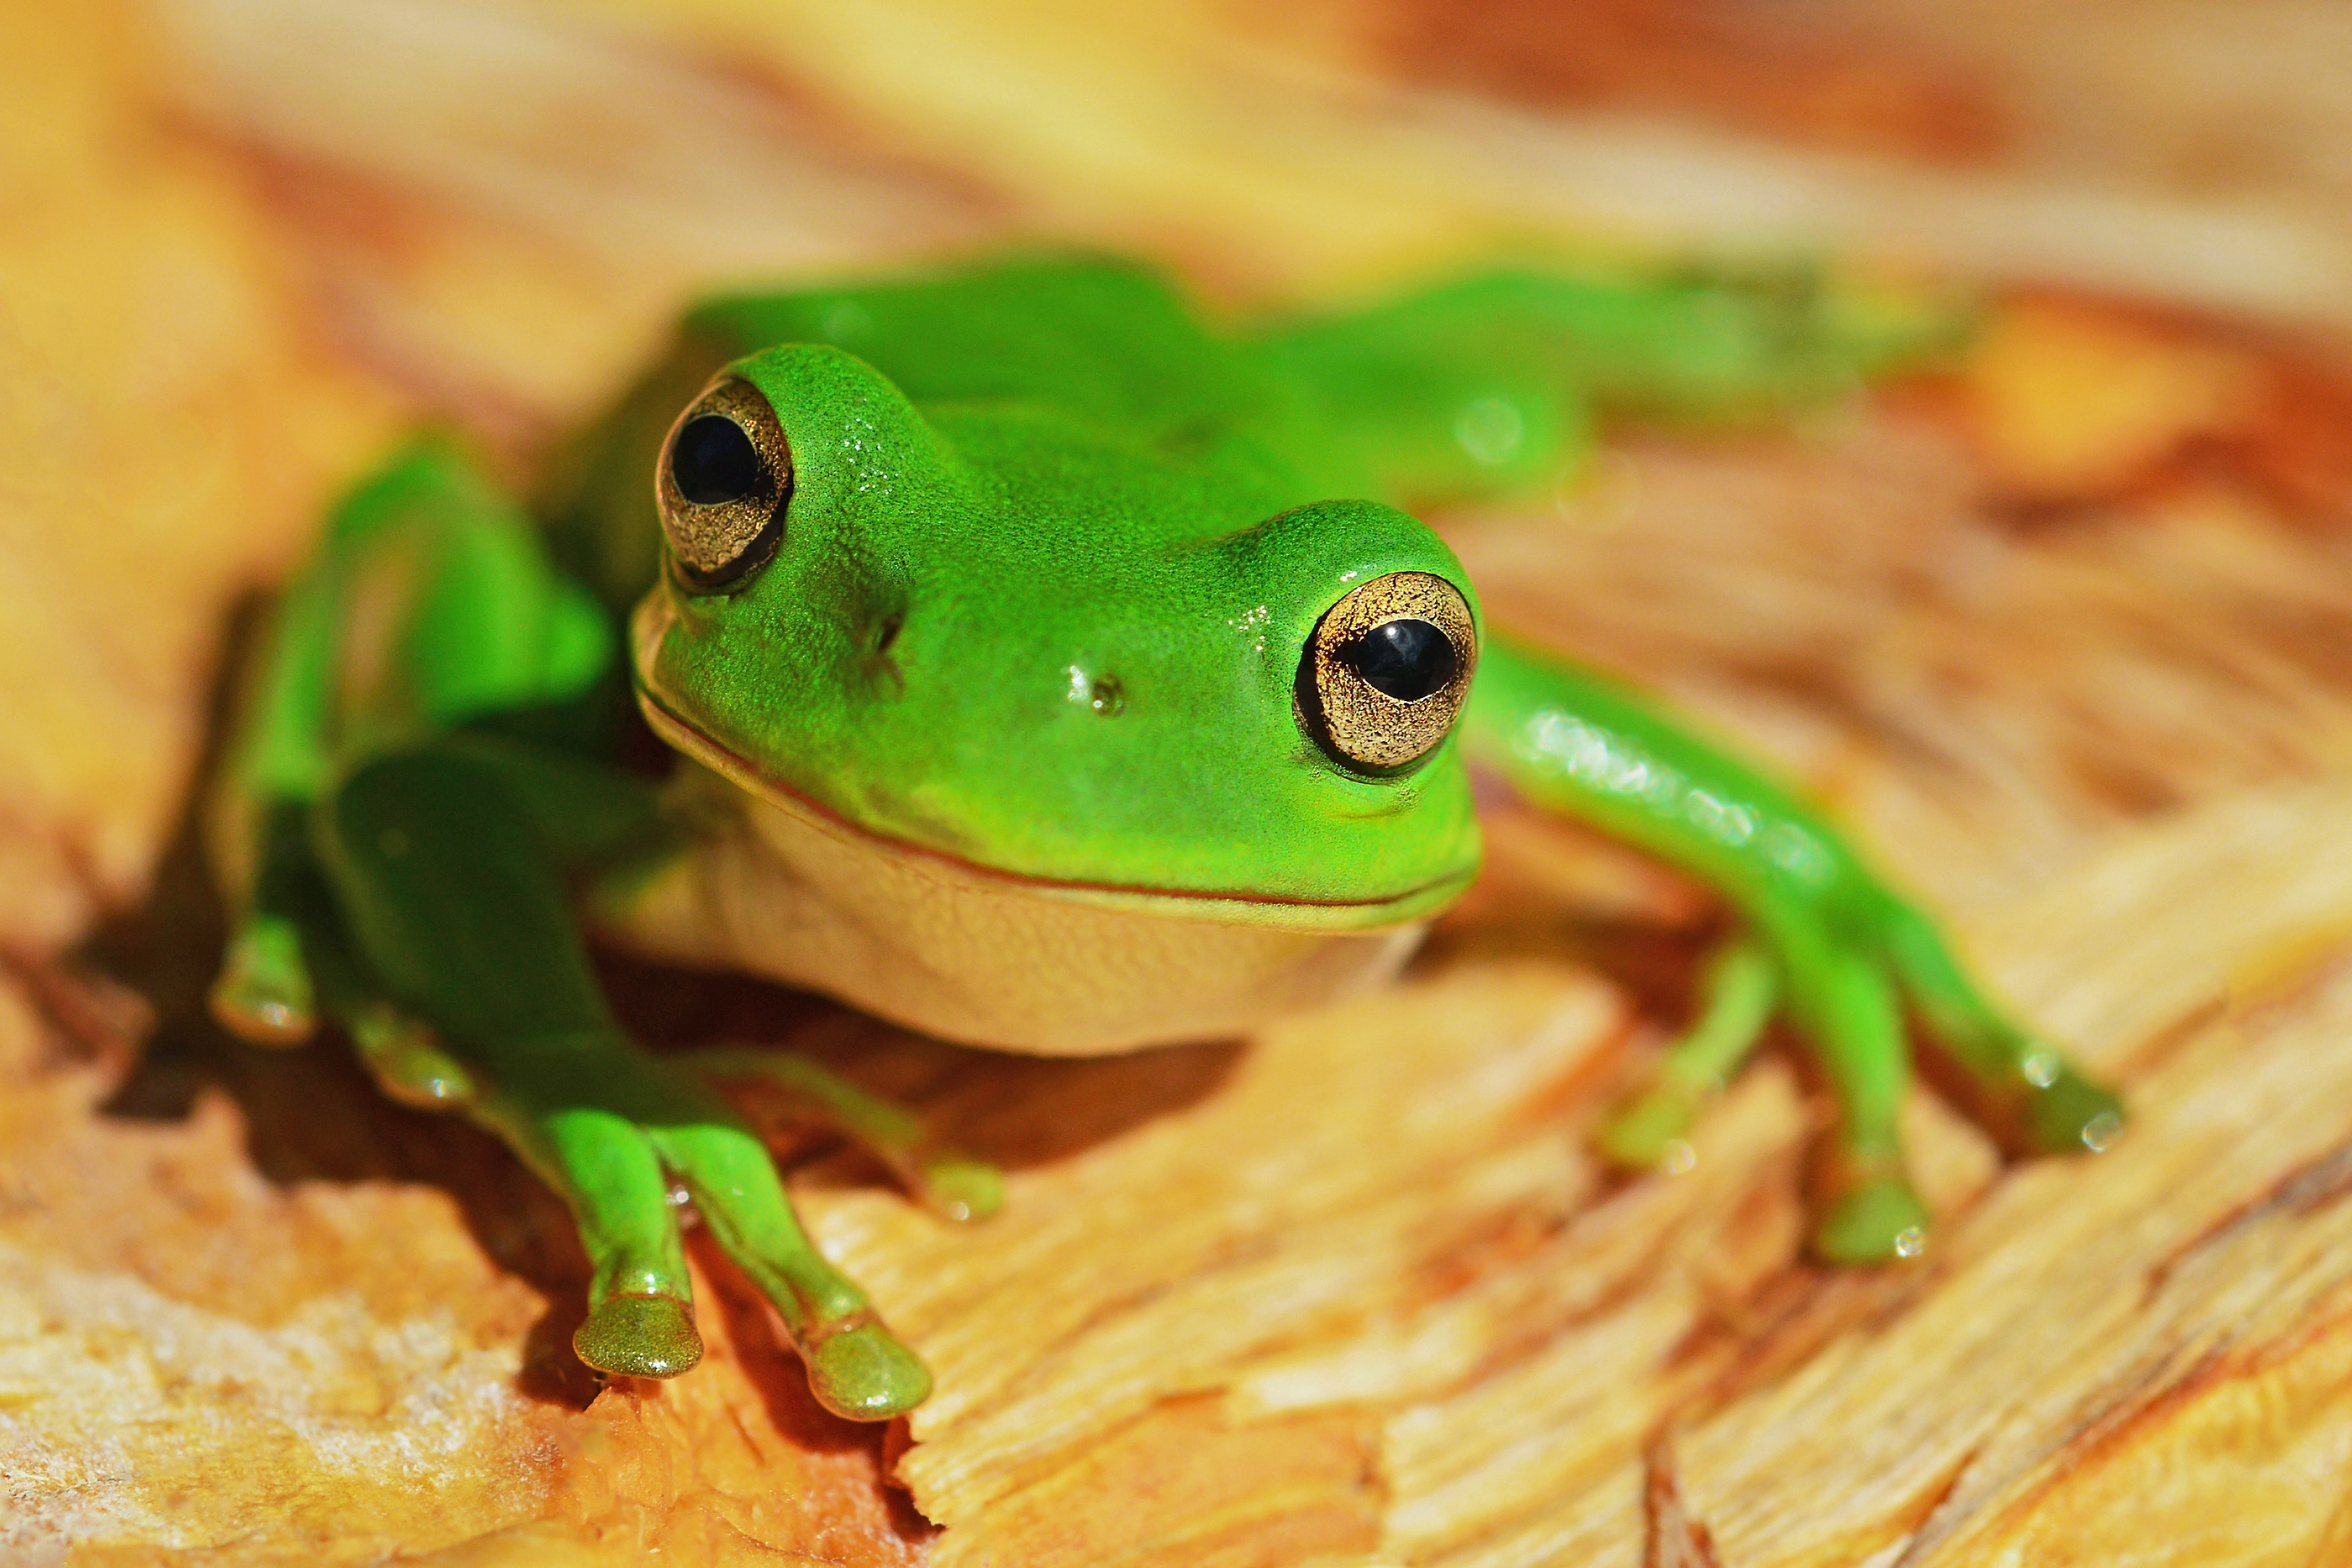 Green Frog Free Stock Image and Picture.